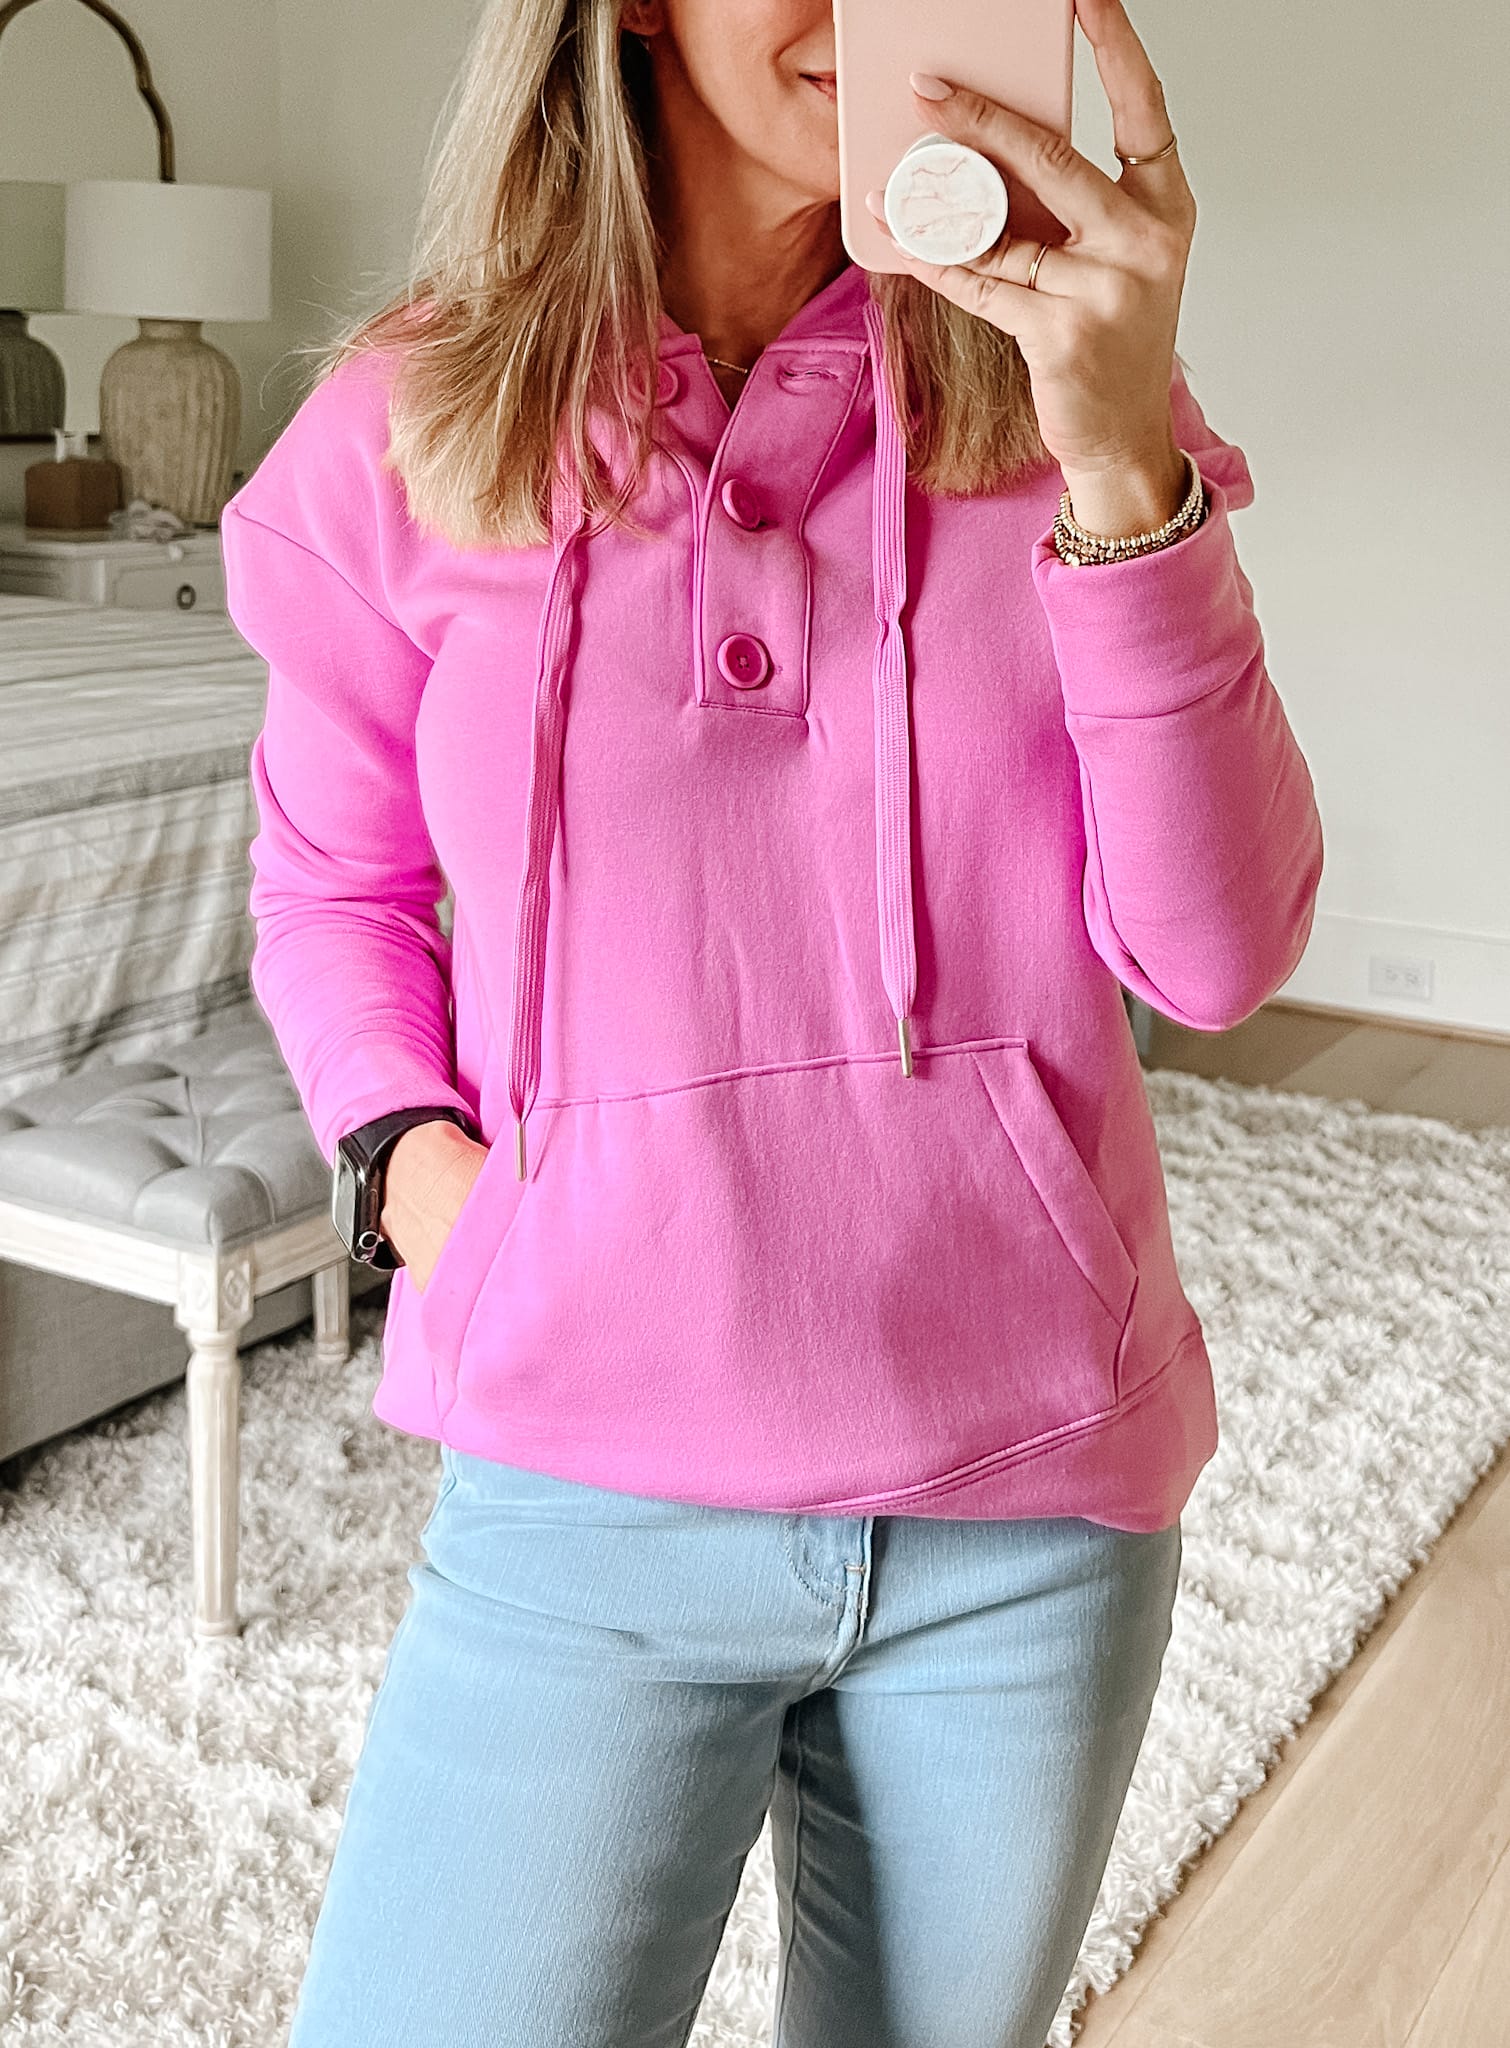 Pink Pullover, Jeans, Sneakers 